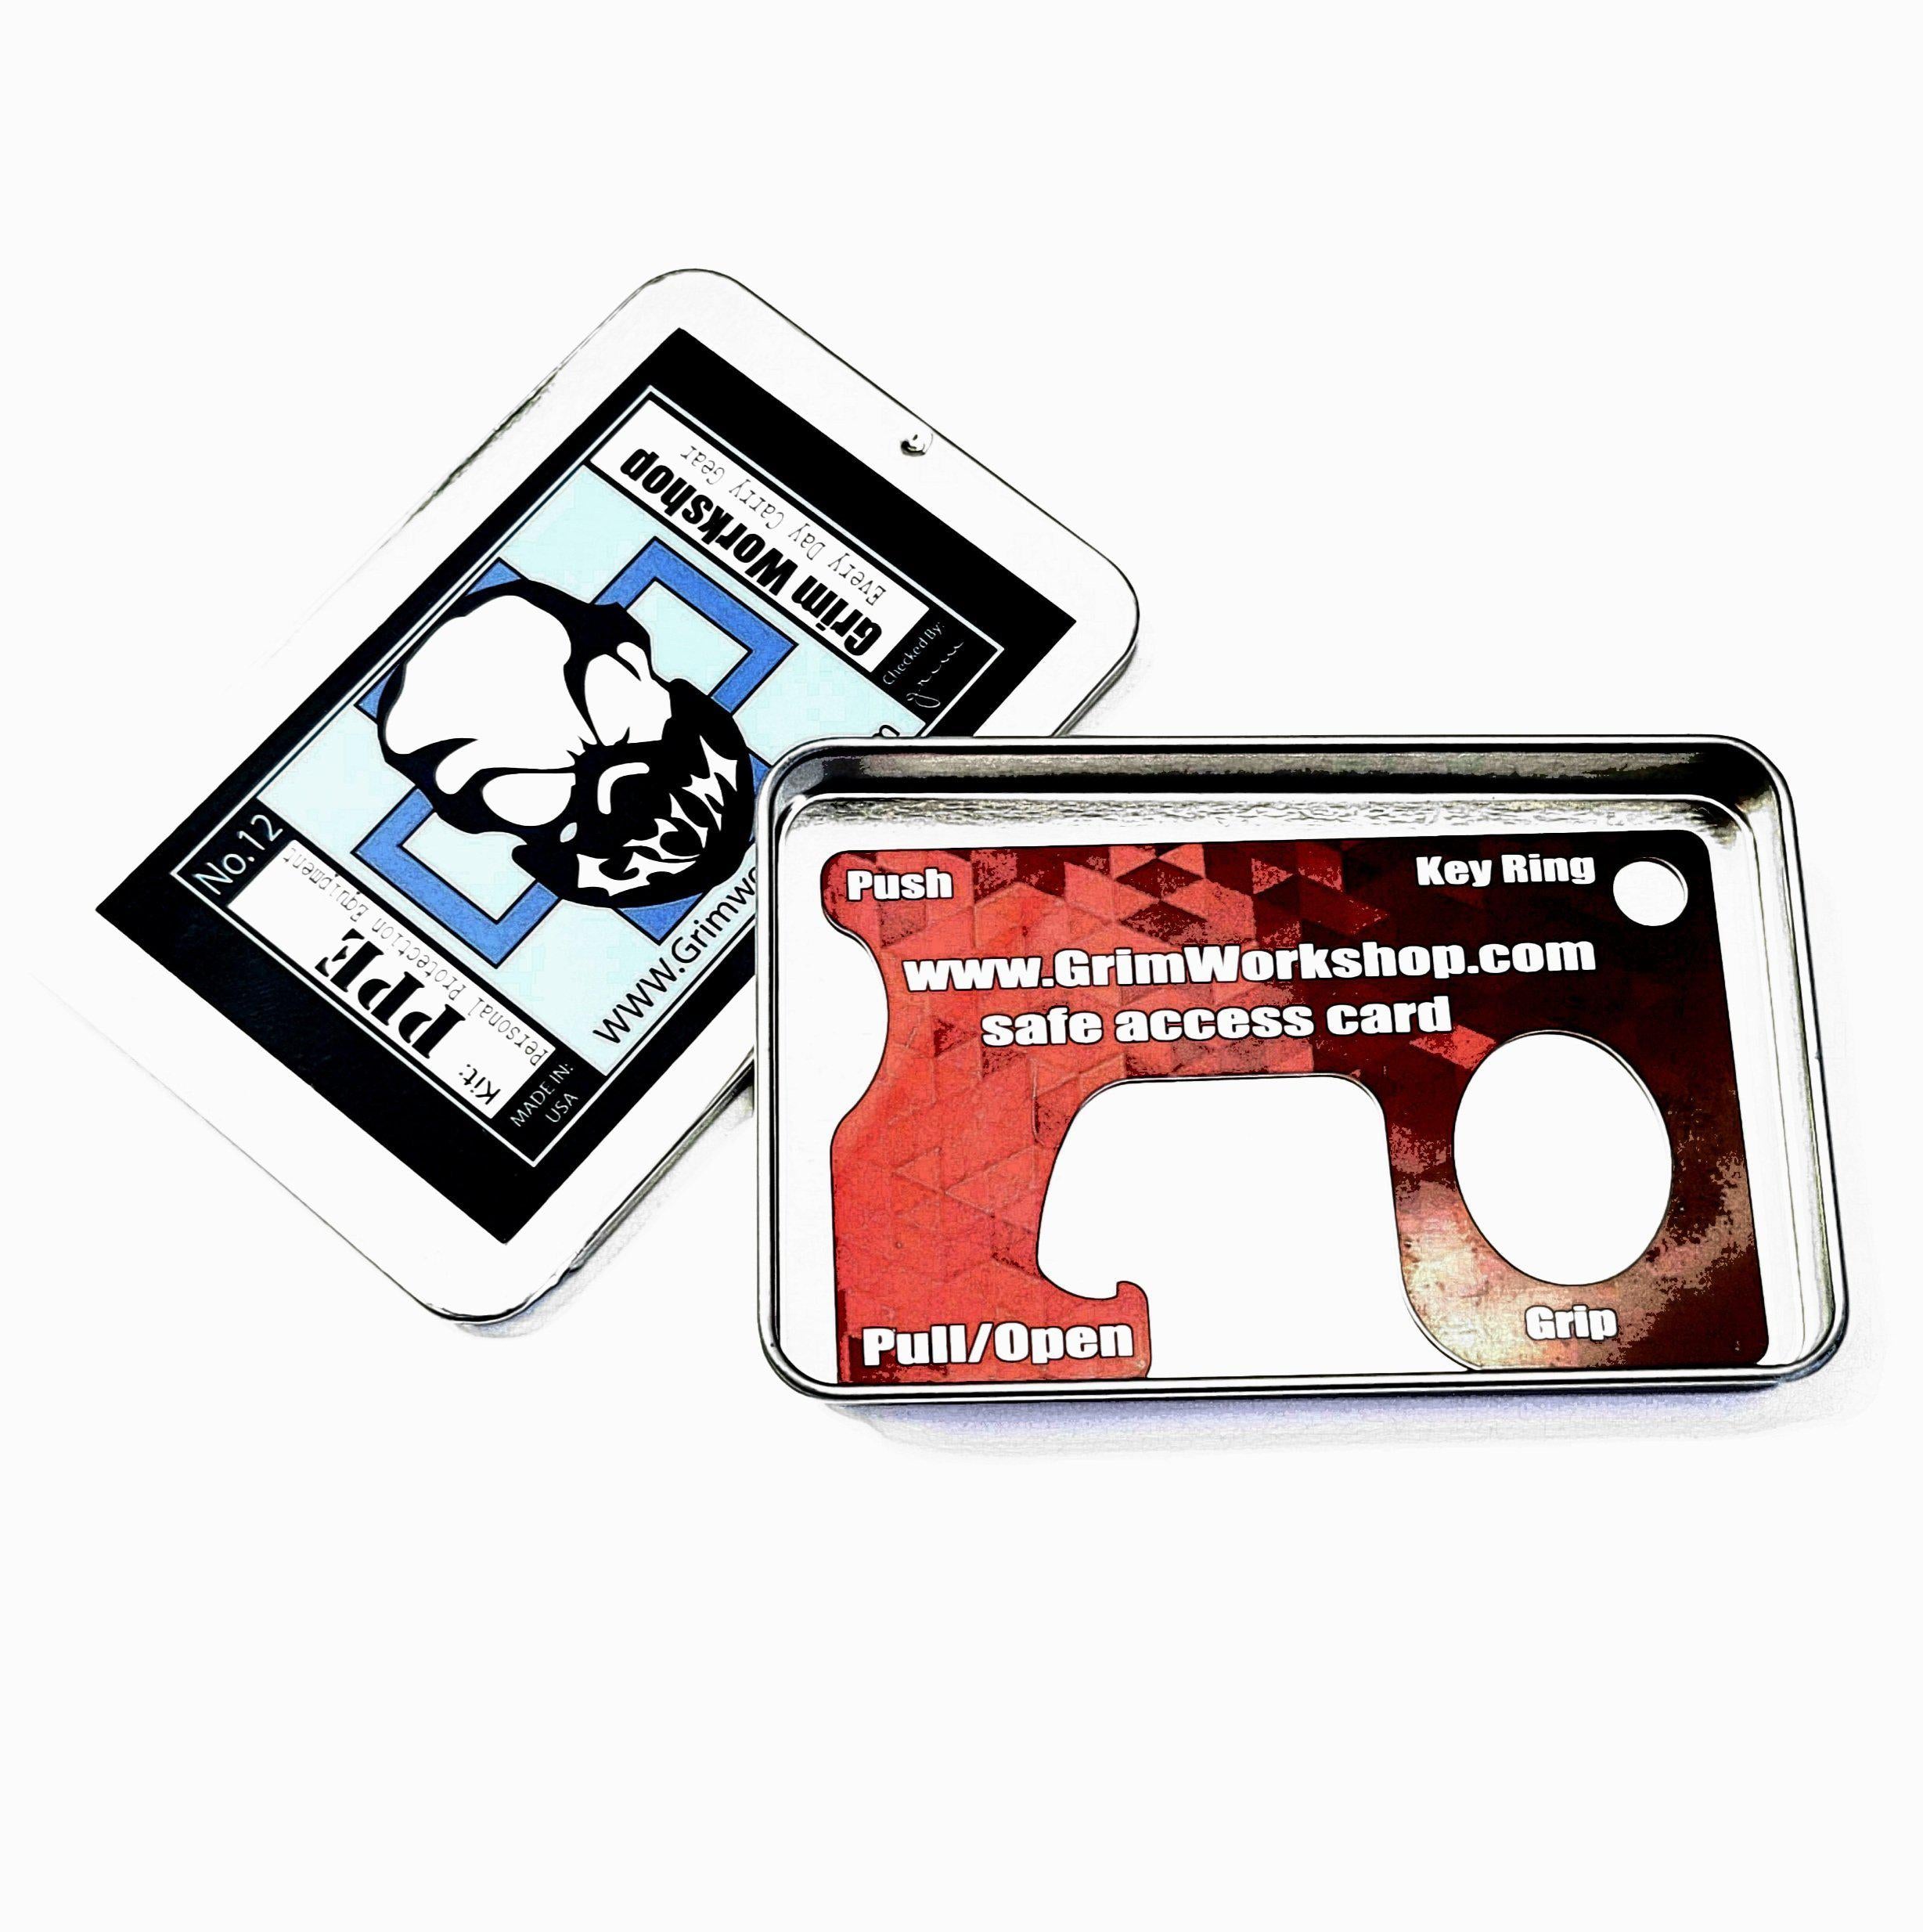 Safe Access Card Touchless Contact Tool-Grimworkshop-bugoutbag-bushcraft-edc-gear-edctool-everydaycarry-survivalcard-survivalkit-wilderness-prepping-toolkit